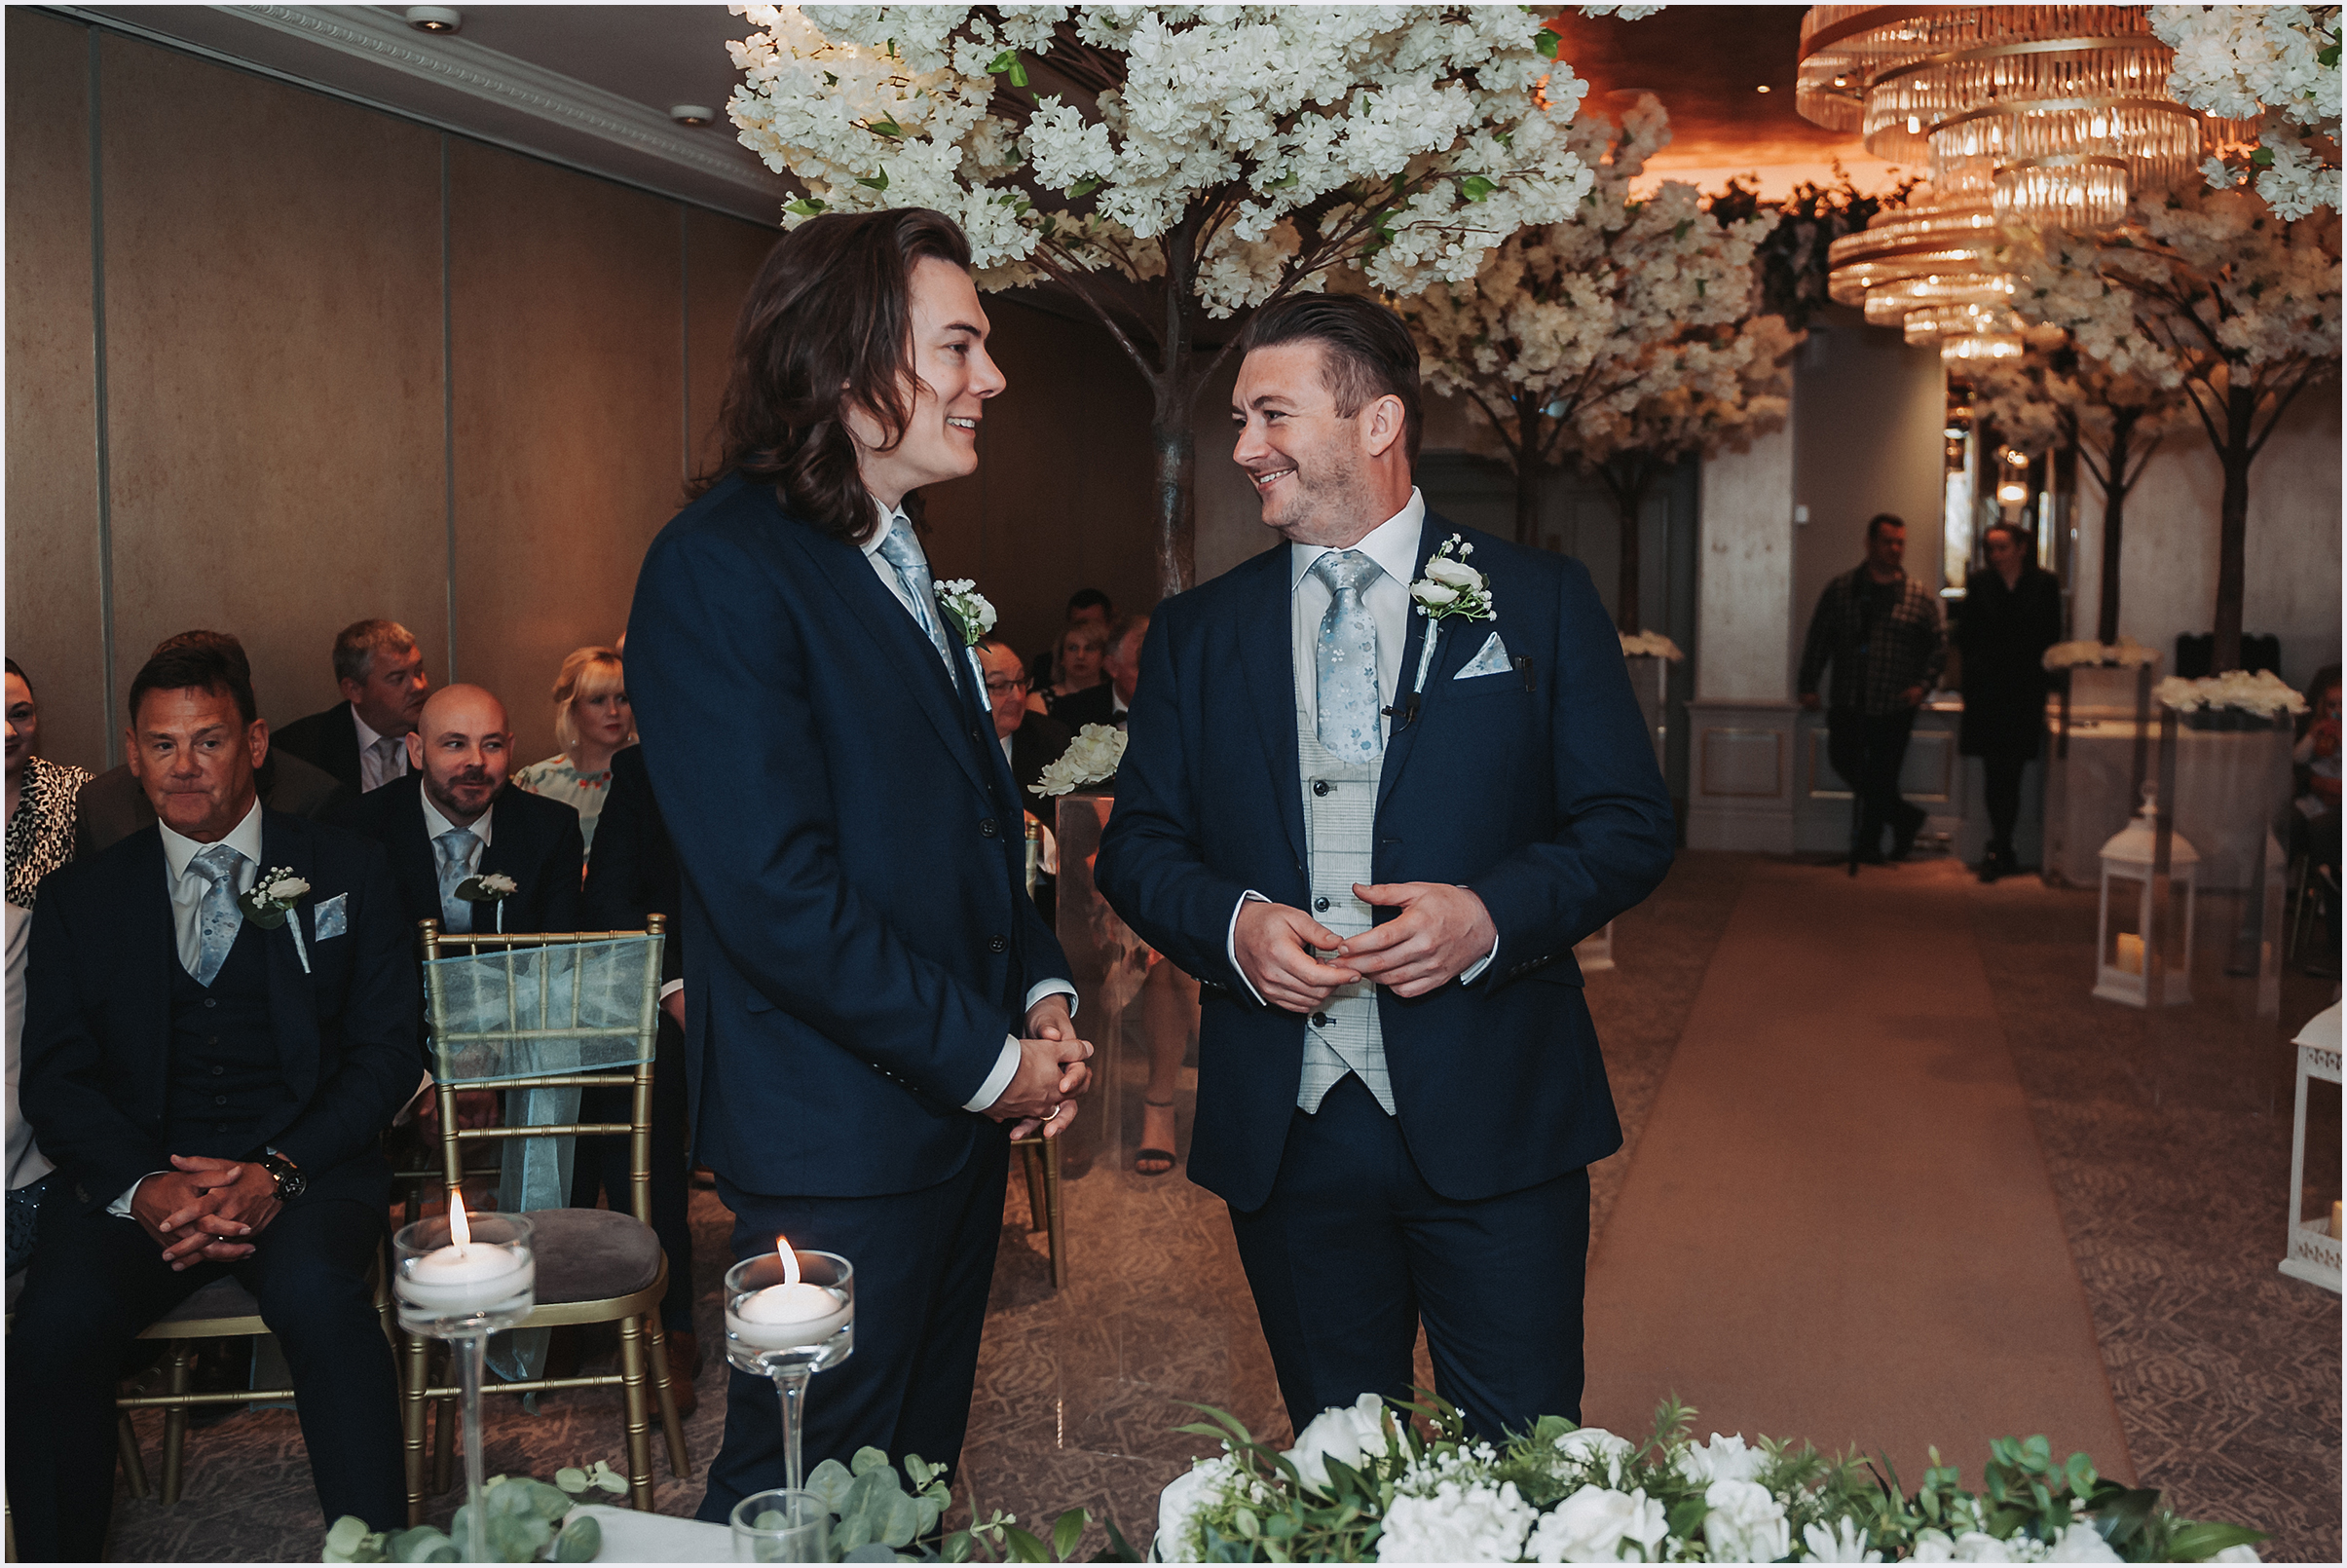 A groom chats with his best man at the top of the aisle waiting for his bride at The Grosvenor Pulford Hotel and Spa